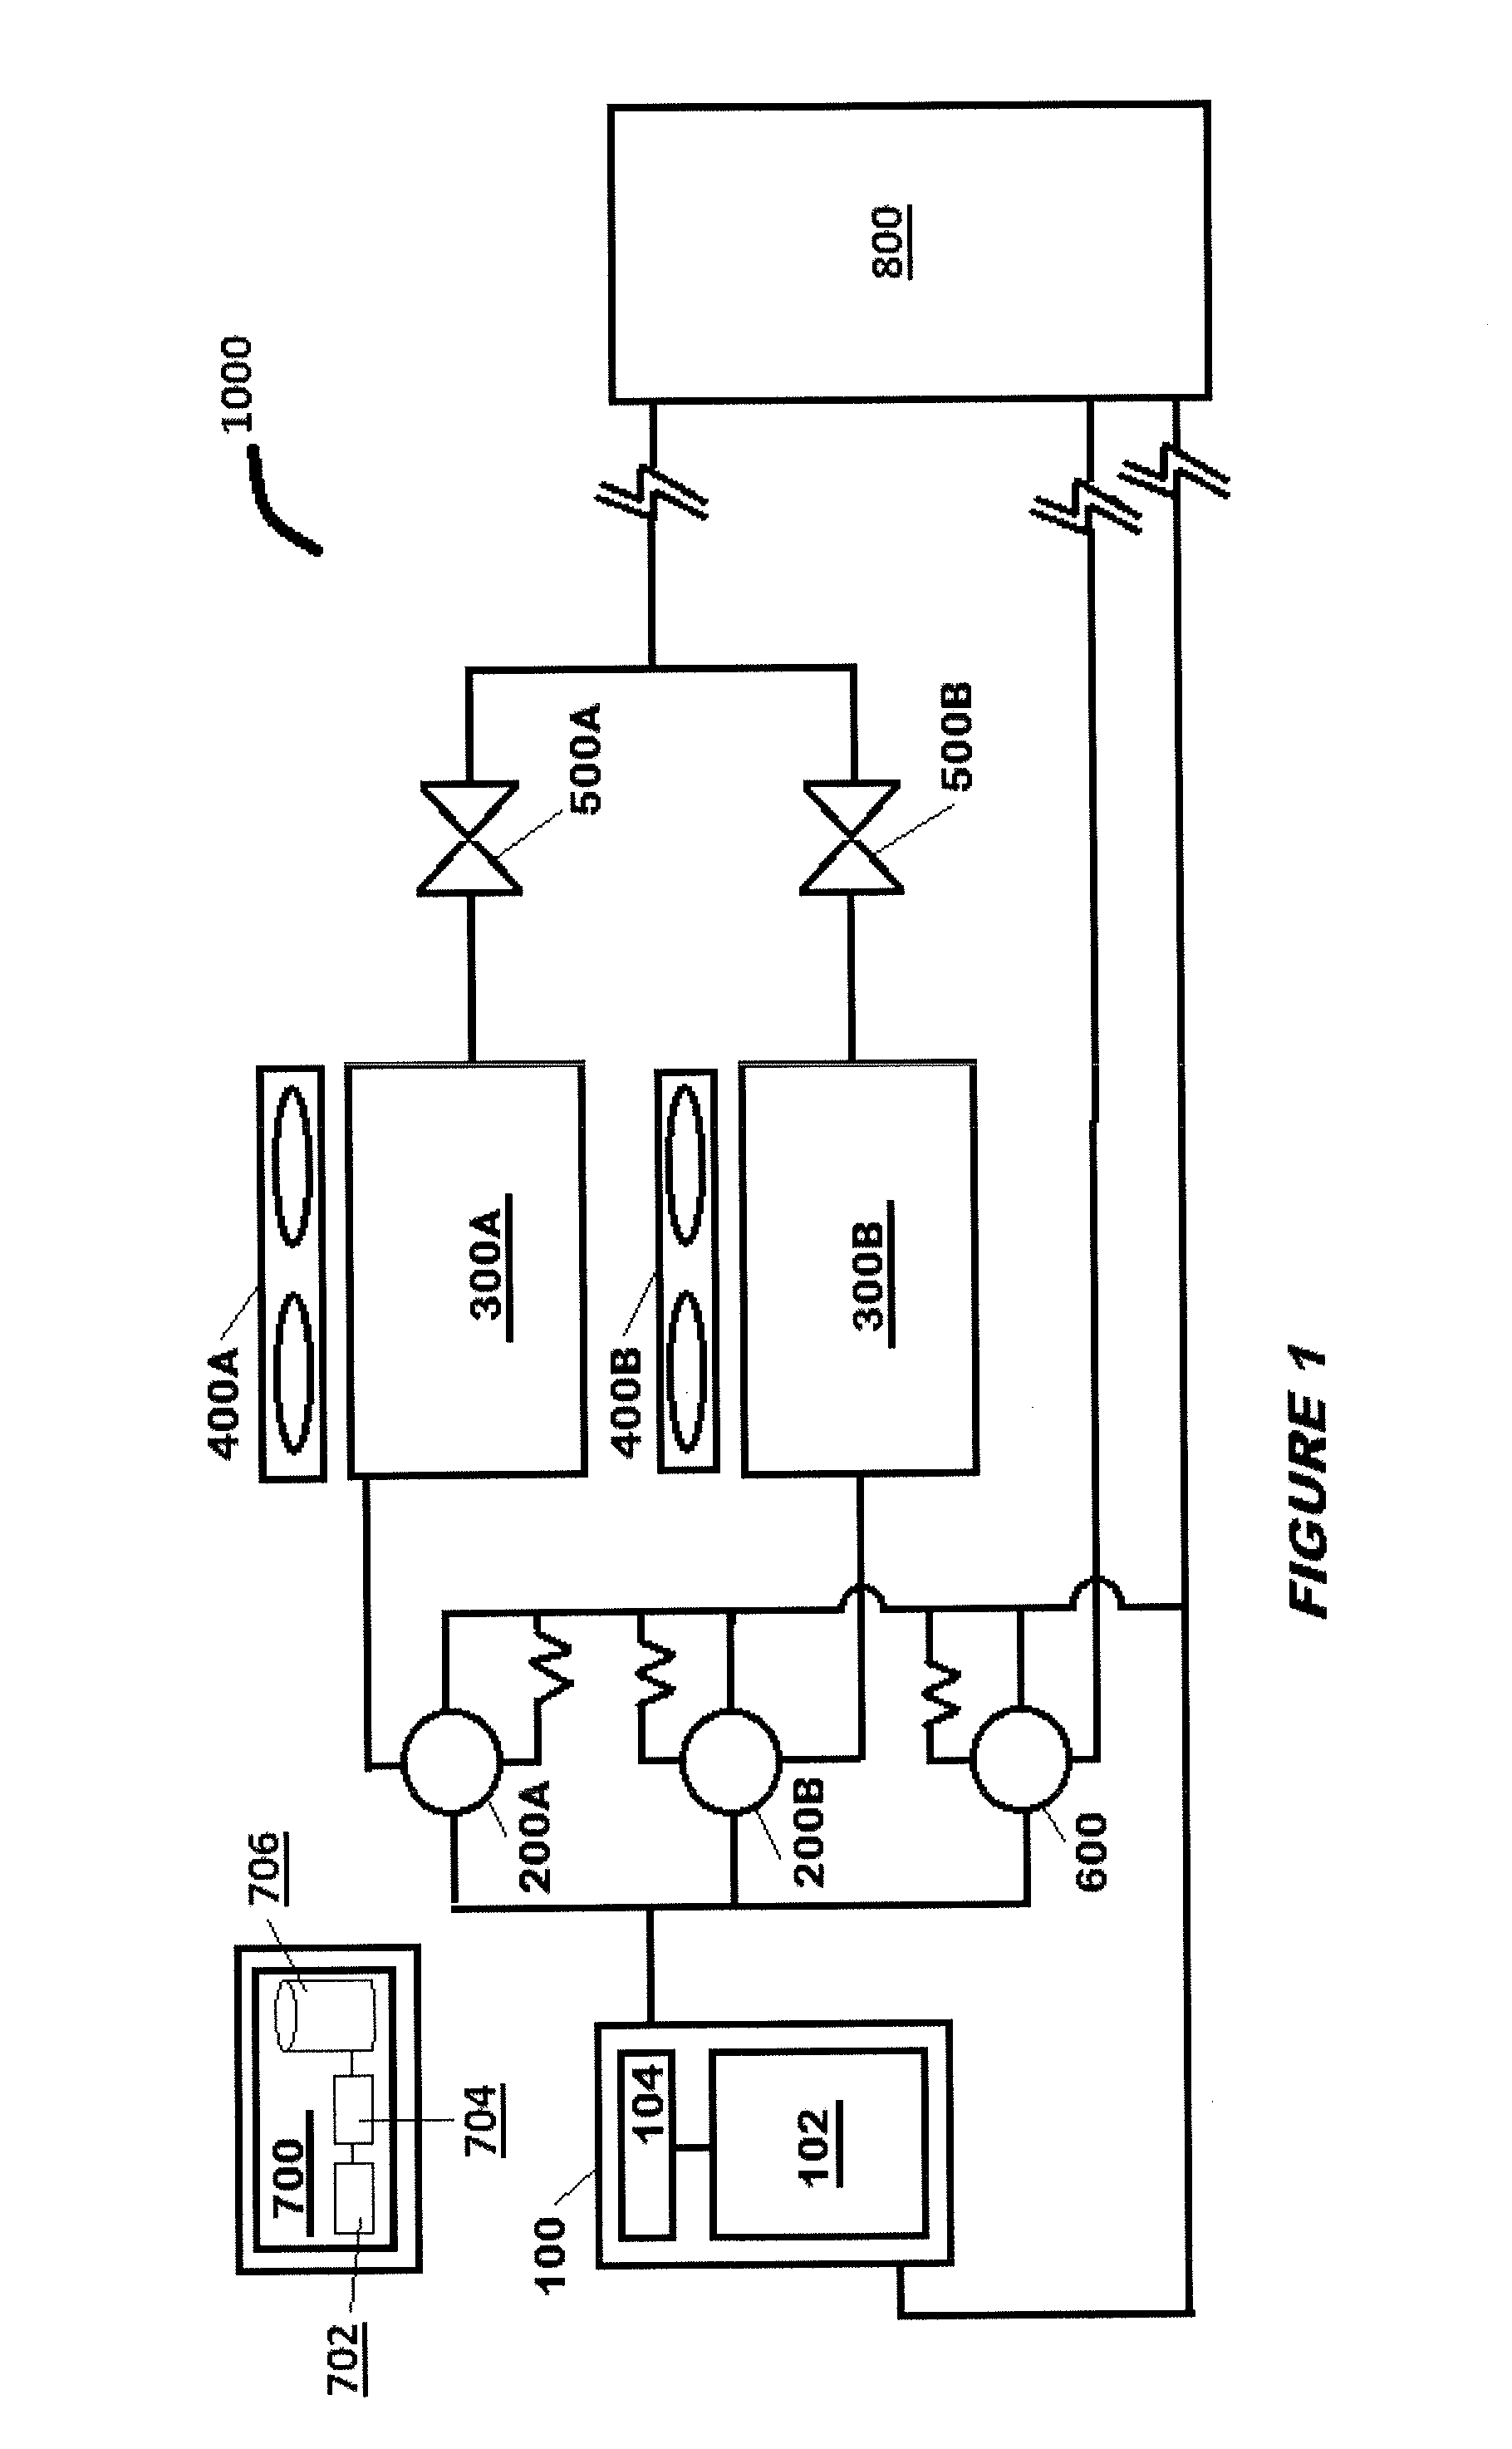 Variable refrigerant flow system operation in low ambient conditions